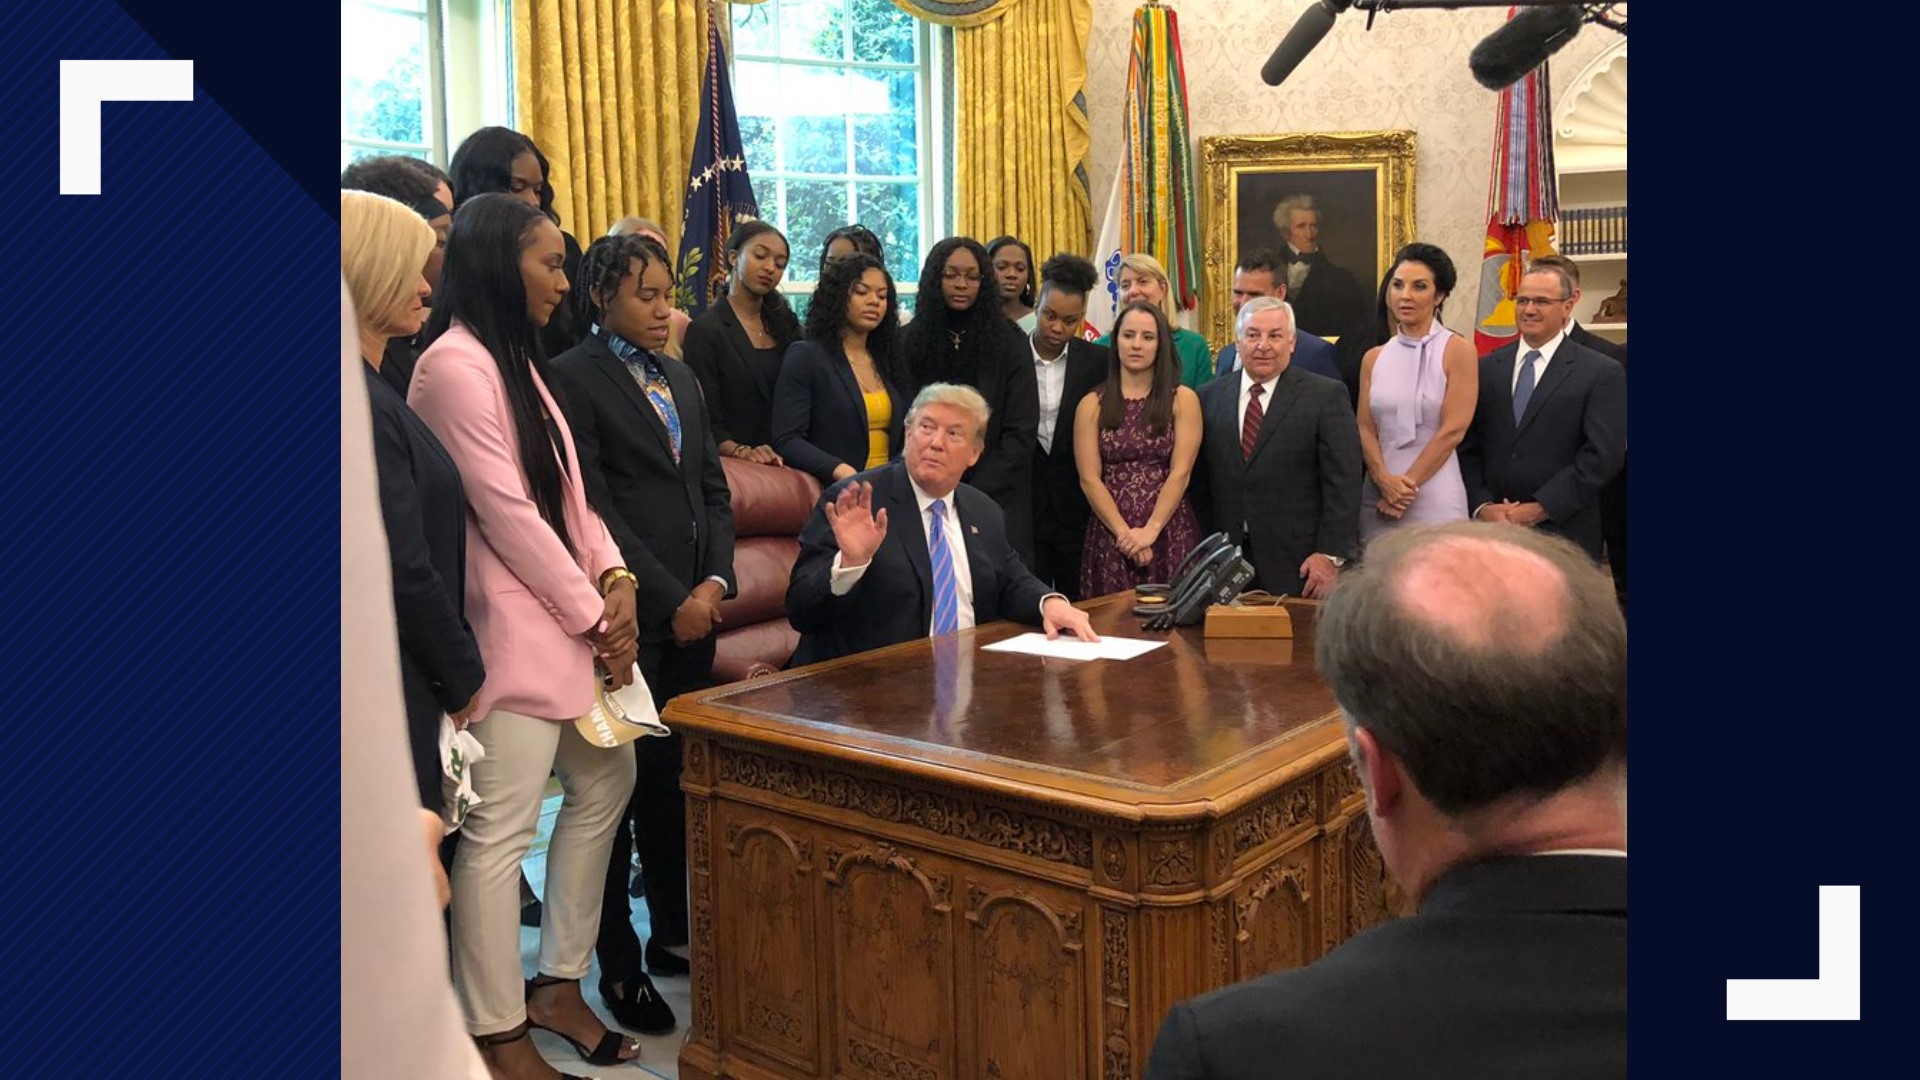 It was a historic day for the Baylor Lady Bears as it became the first basketball team to receive its own celebration under President Donald Trump. The team met with the president Monday afternoon.